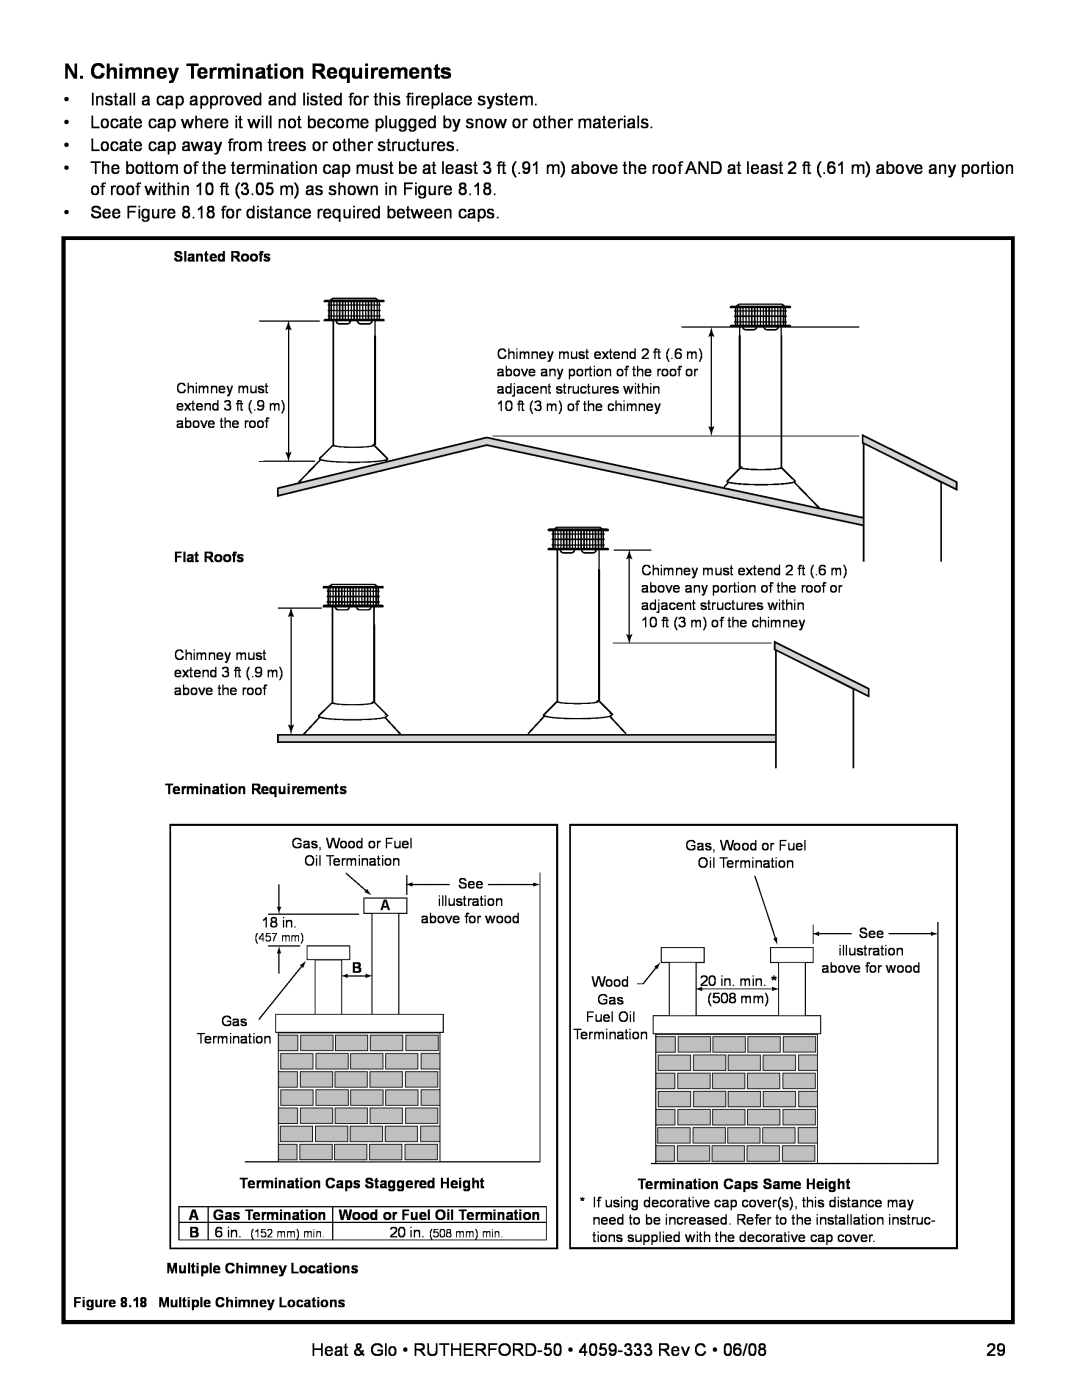 Heat & Glo LifeStyle 50 owner manual N. Chimney Termination Requirements 